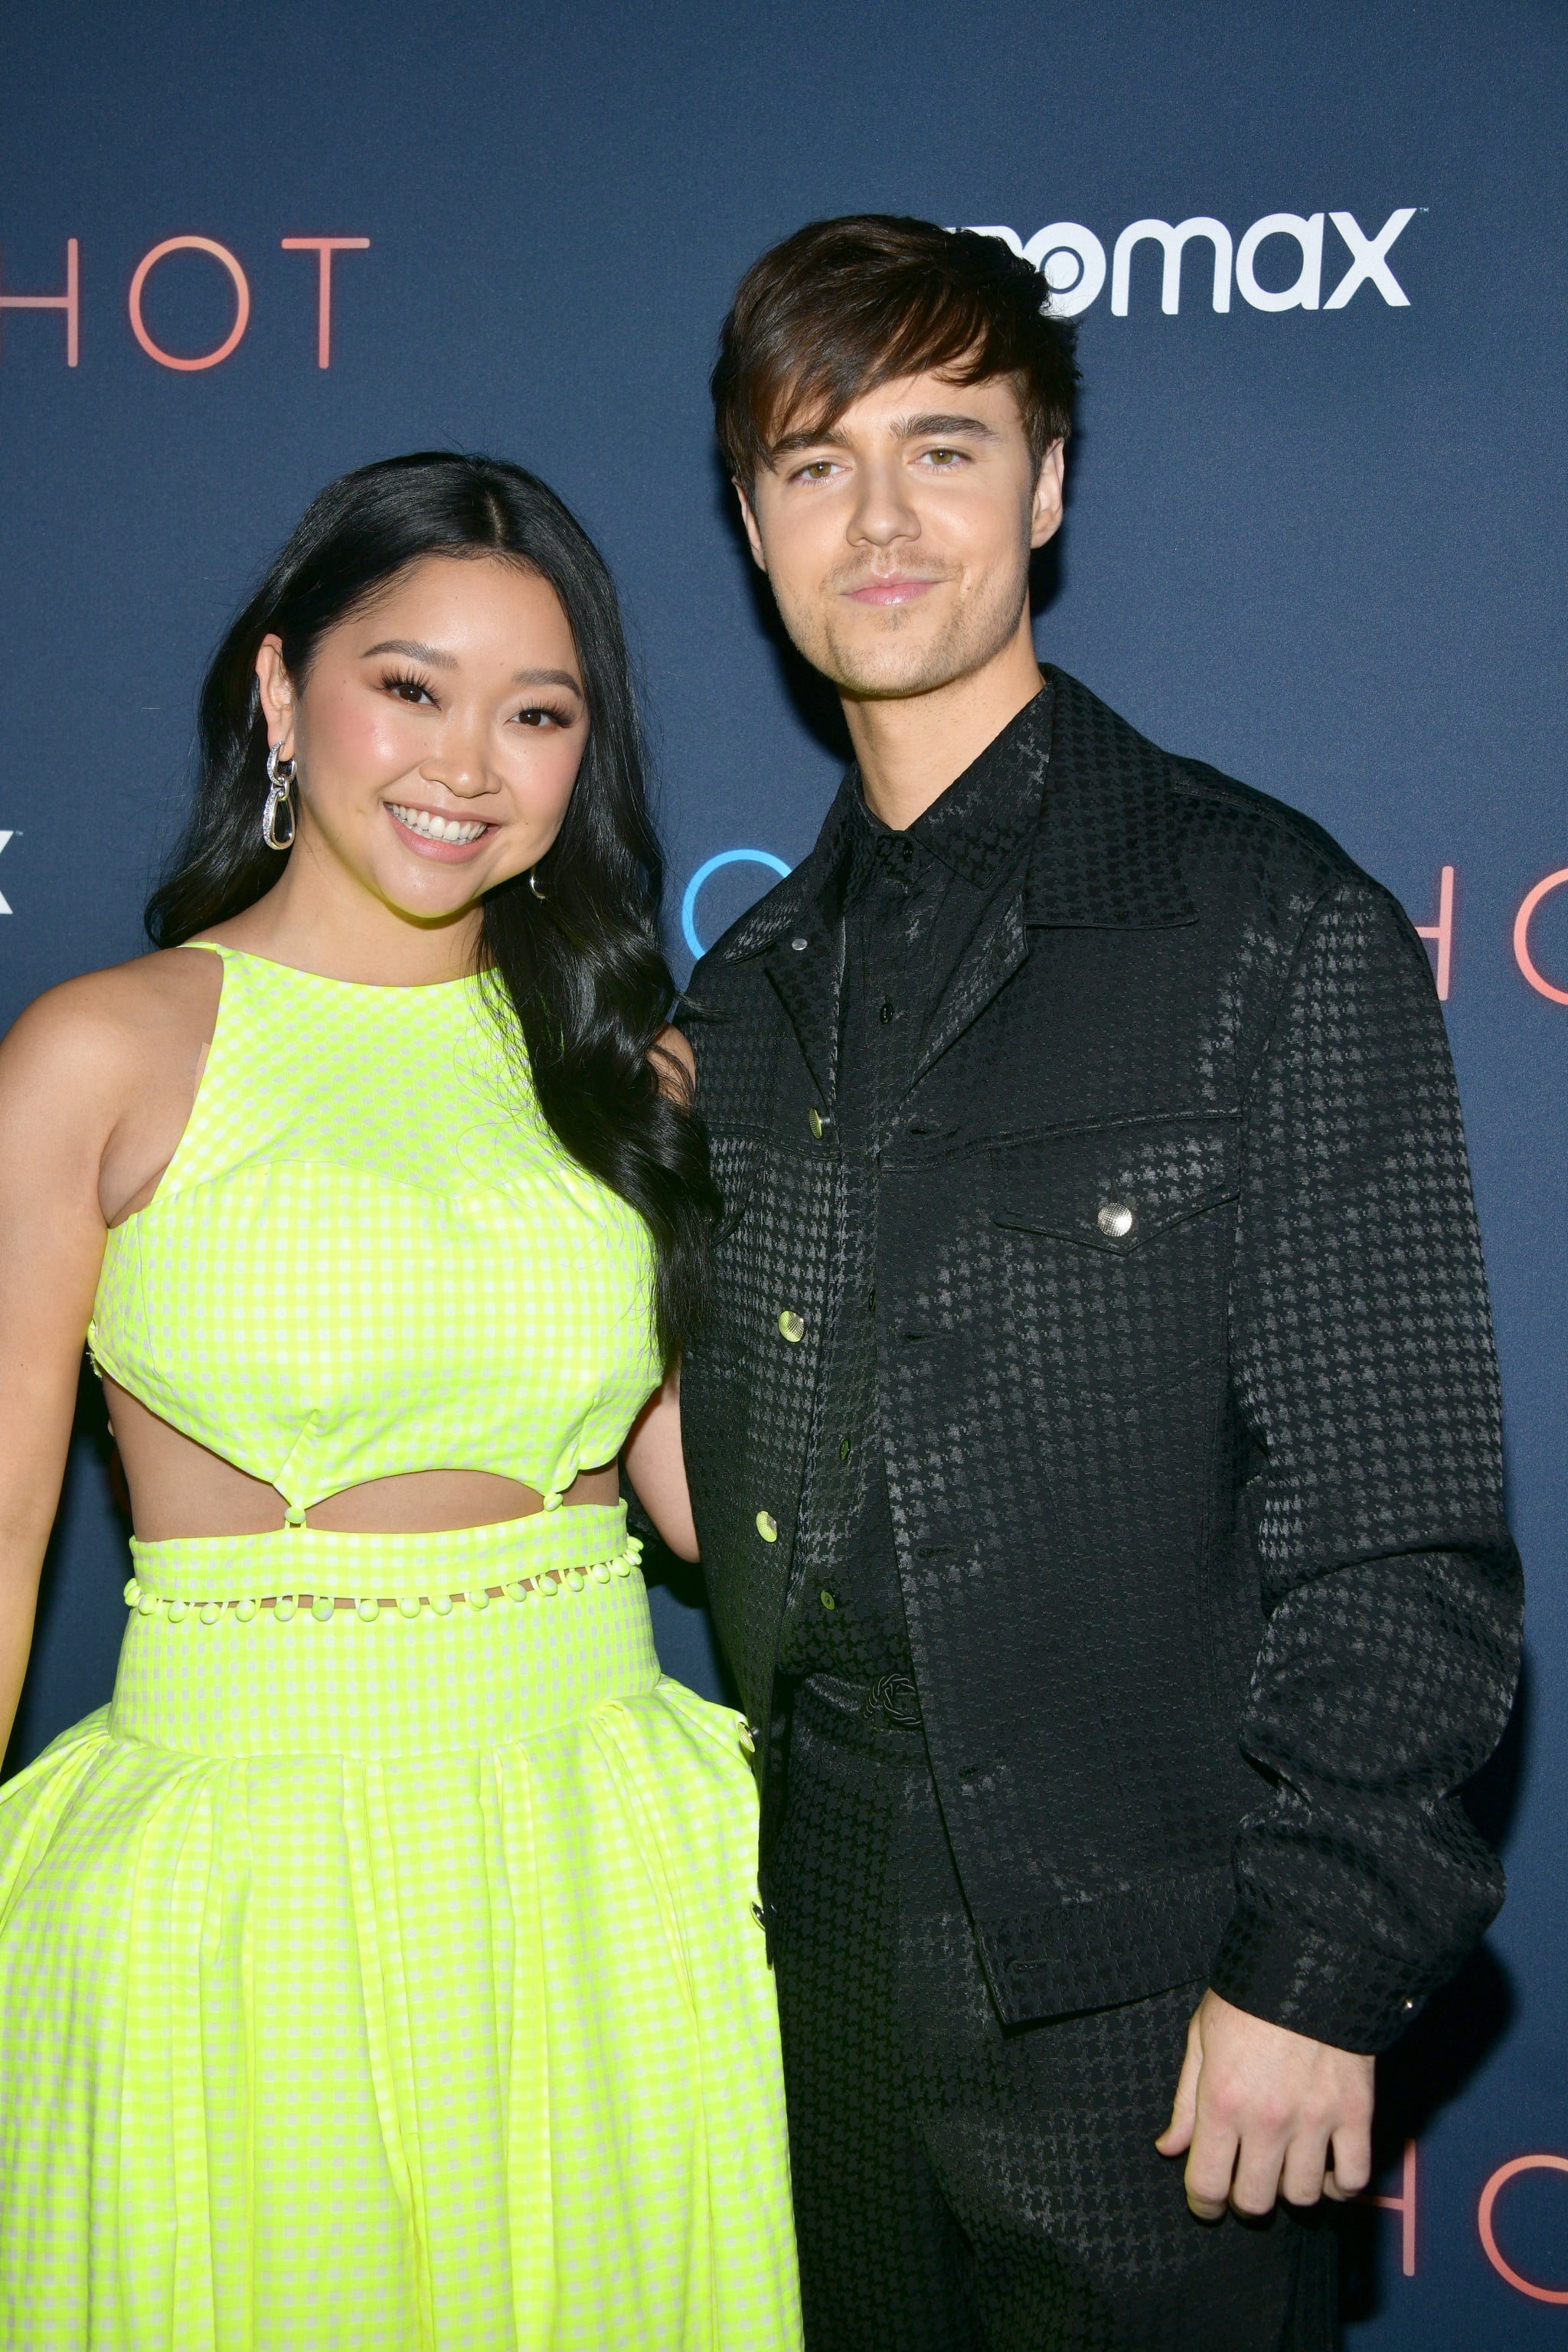 WEST HOLLYWOOD, CALIFORNIA - MARCH 23: Lana Condor and Anthony De La Torre attend attend attend the special screening of HBO Max's 